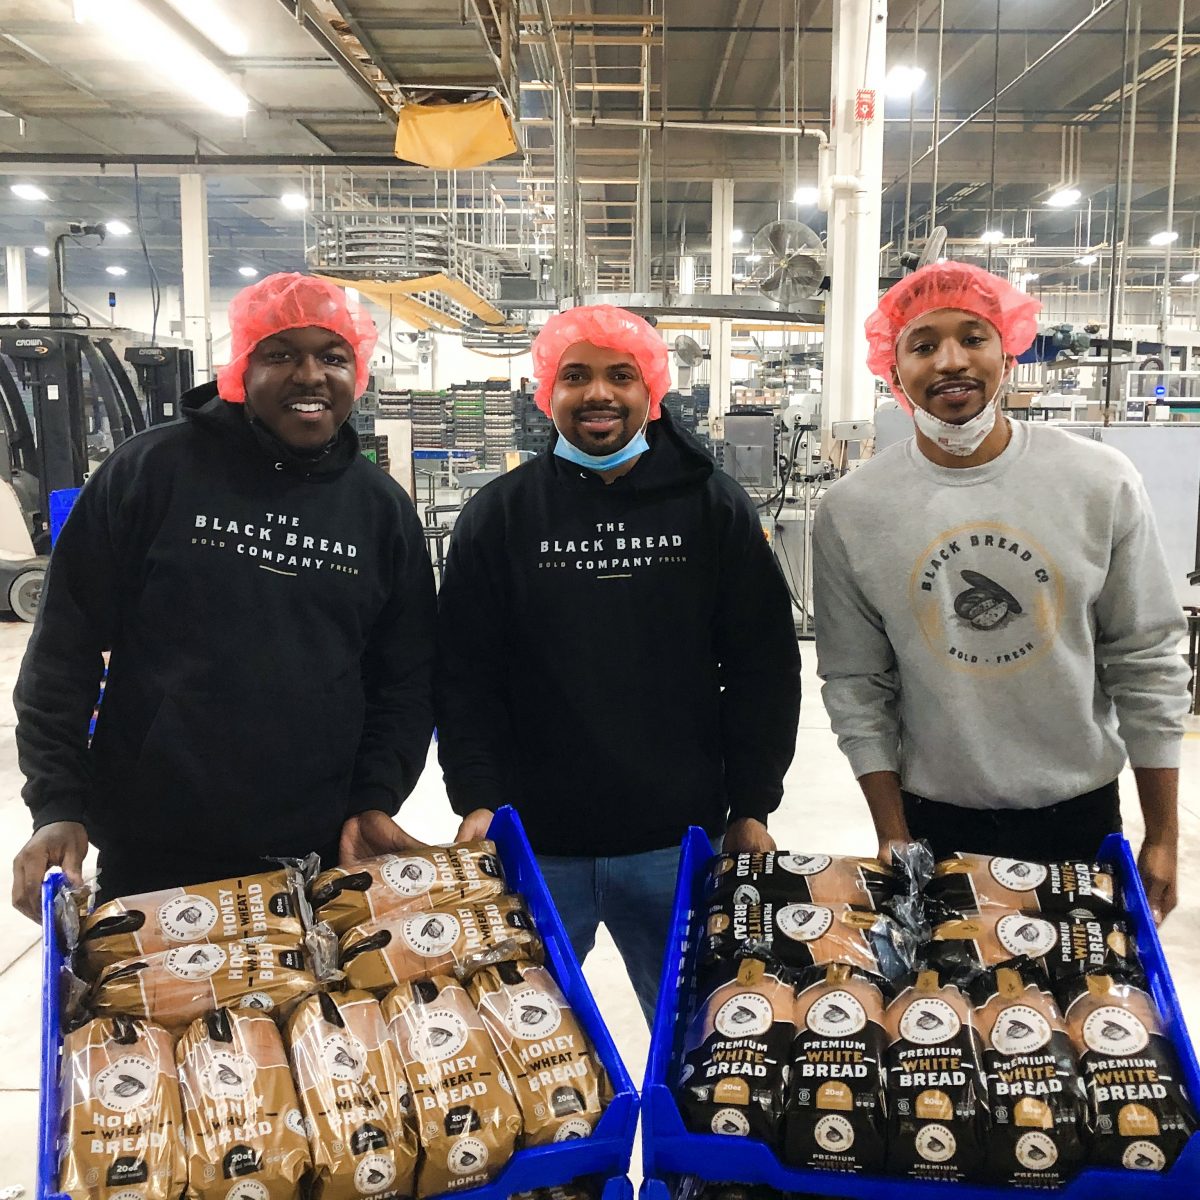 The Black Bread Company founders Jamel Lewis, Mark Edmond and Charles Alexander